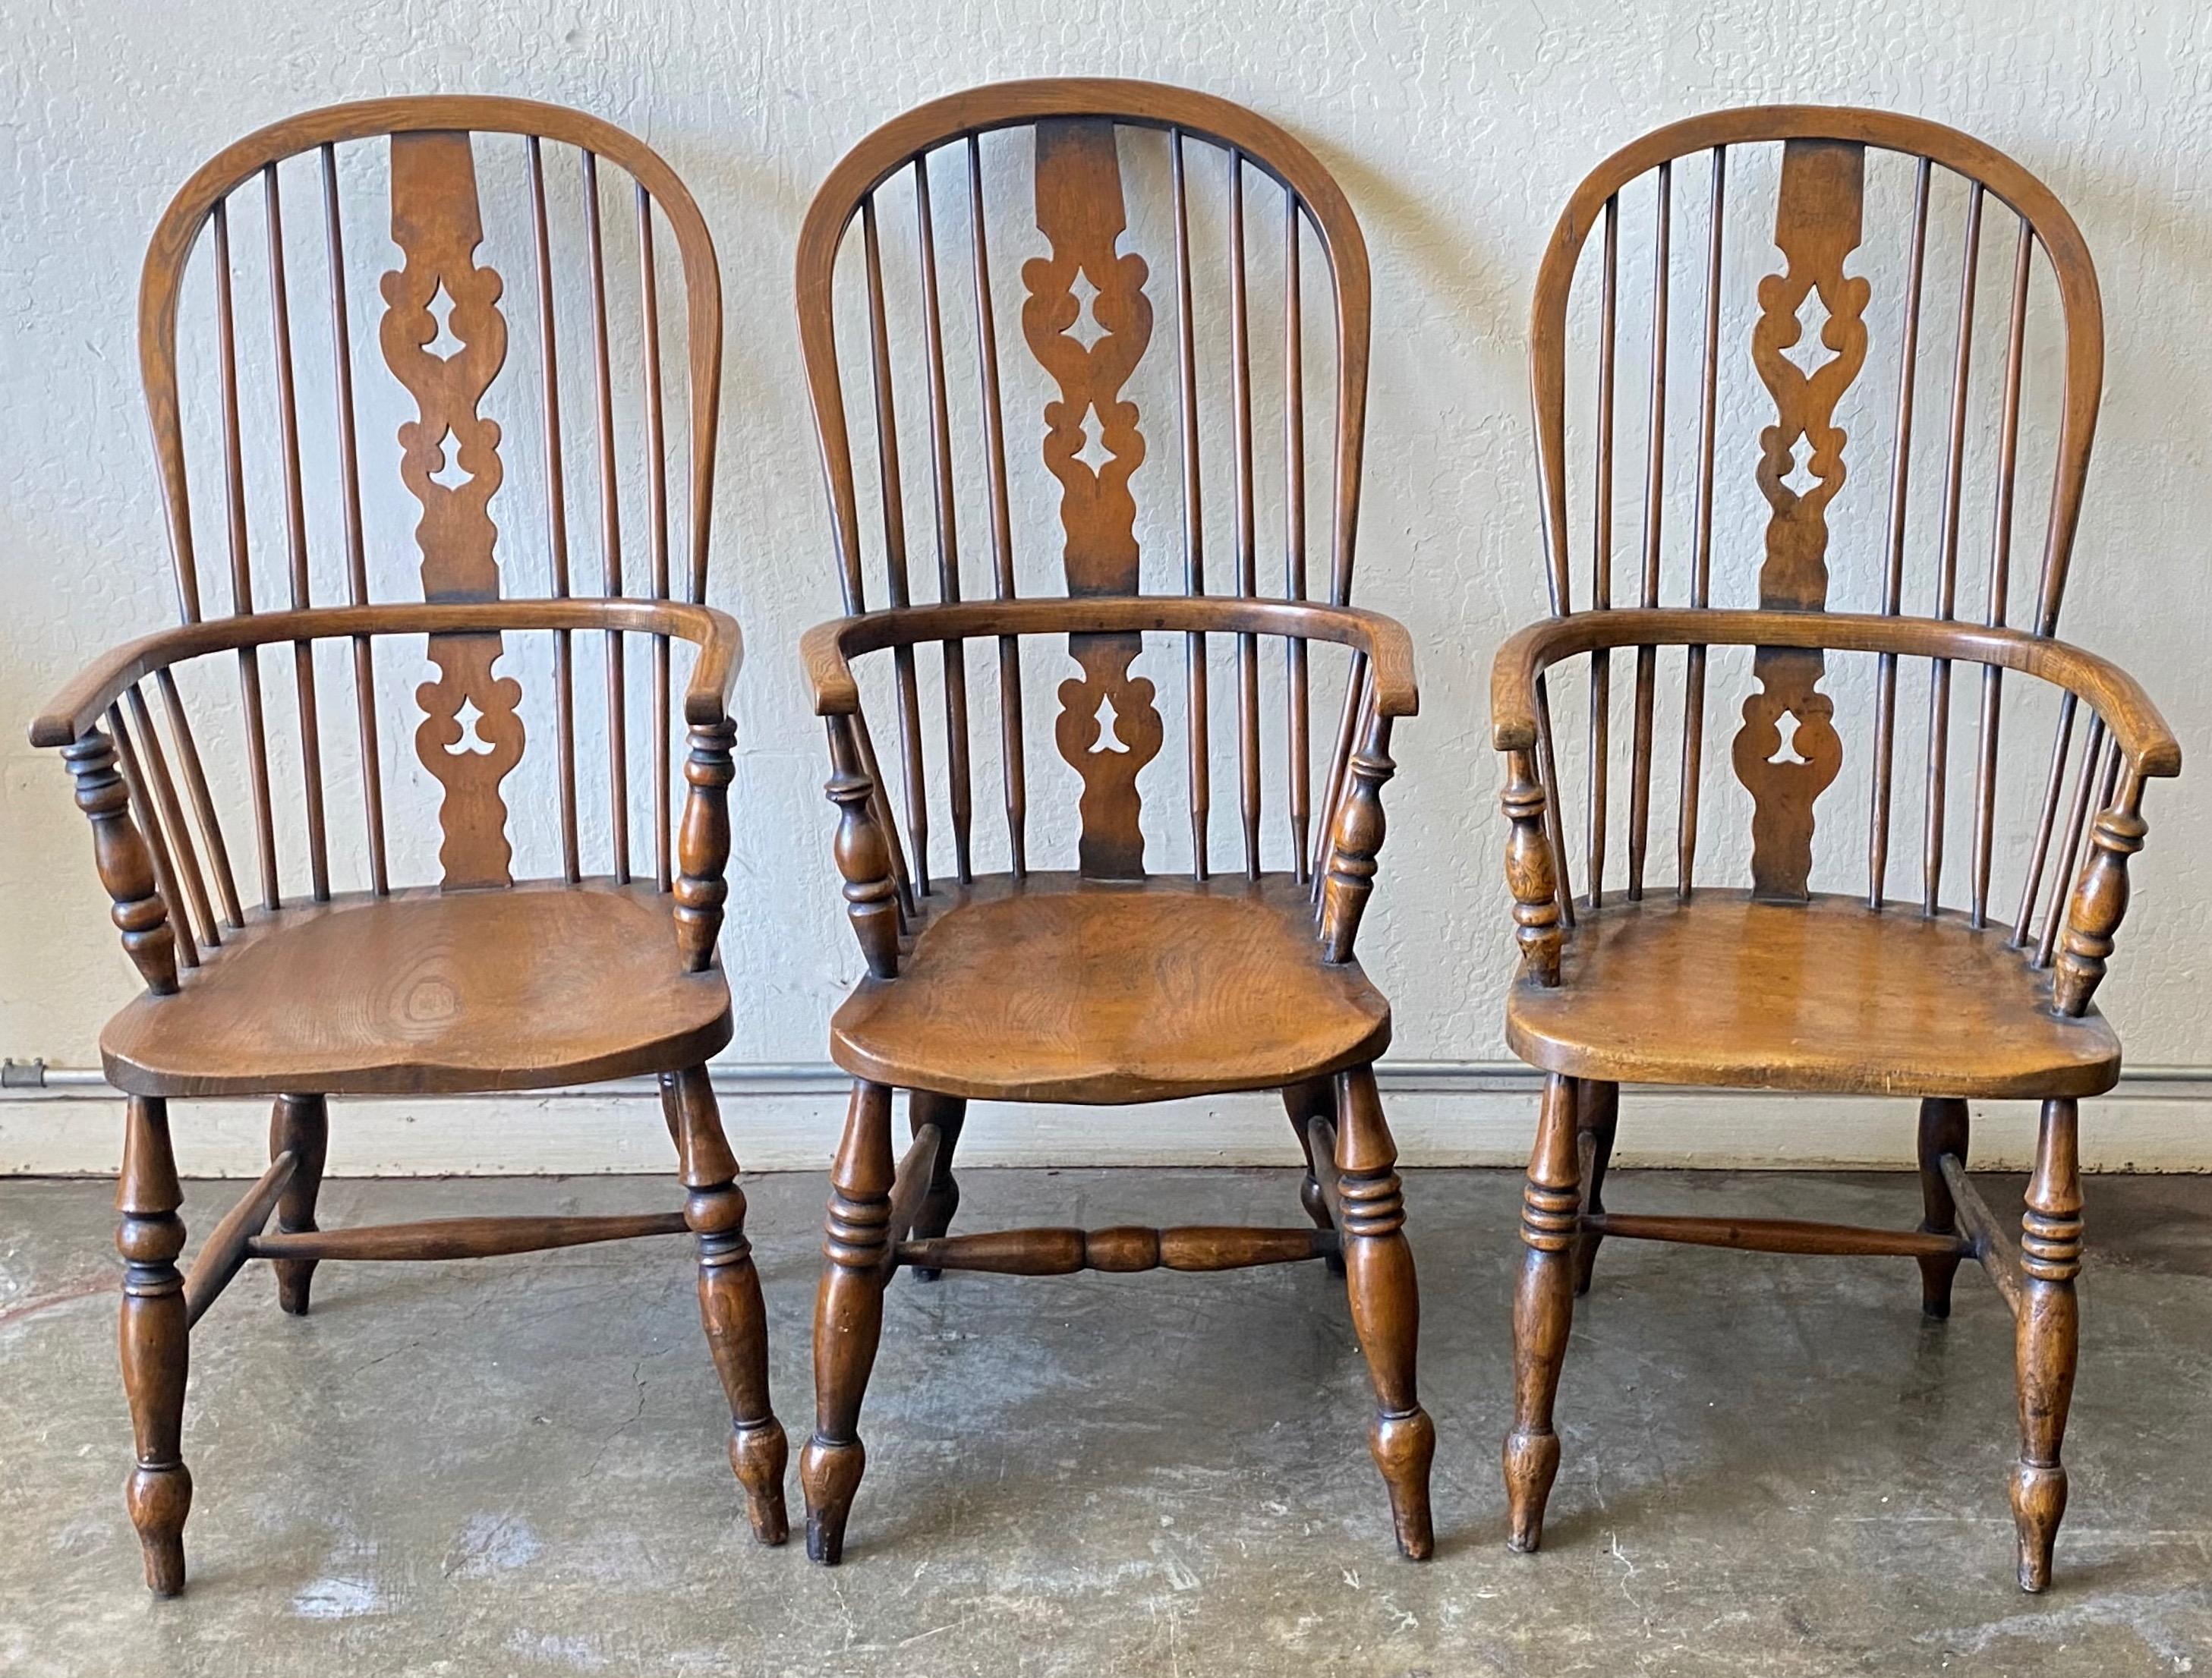 19th Century English Oak and Yew Wood Windsor Style Dining Chairs, Set of Six 1